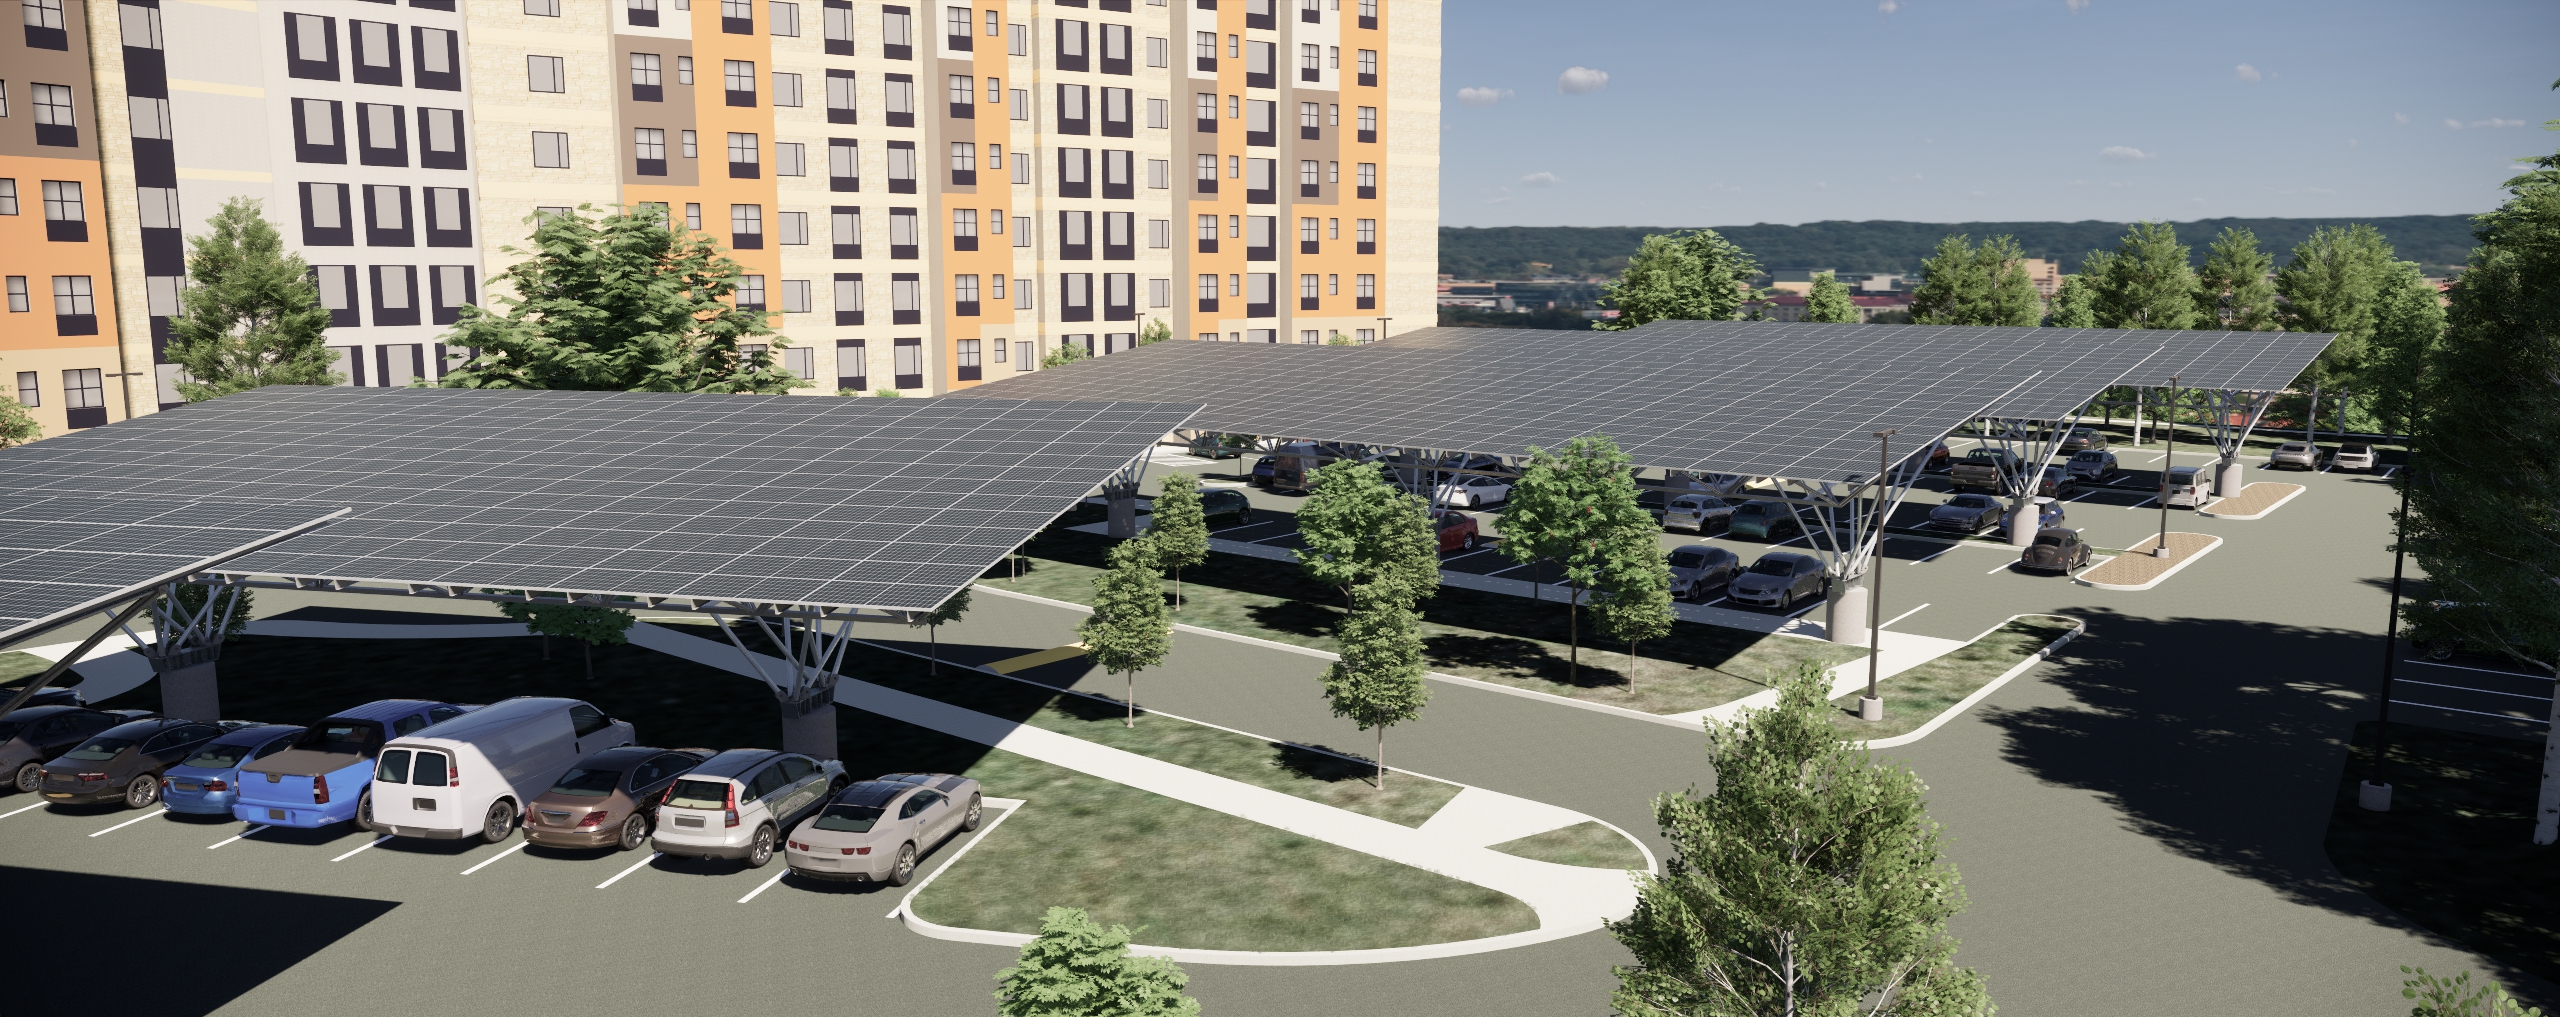 More Solar Panels Are Coming To Apartment Buildings In Ward 8